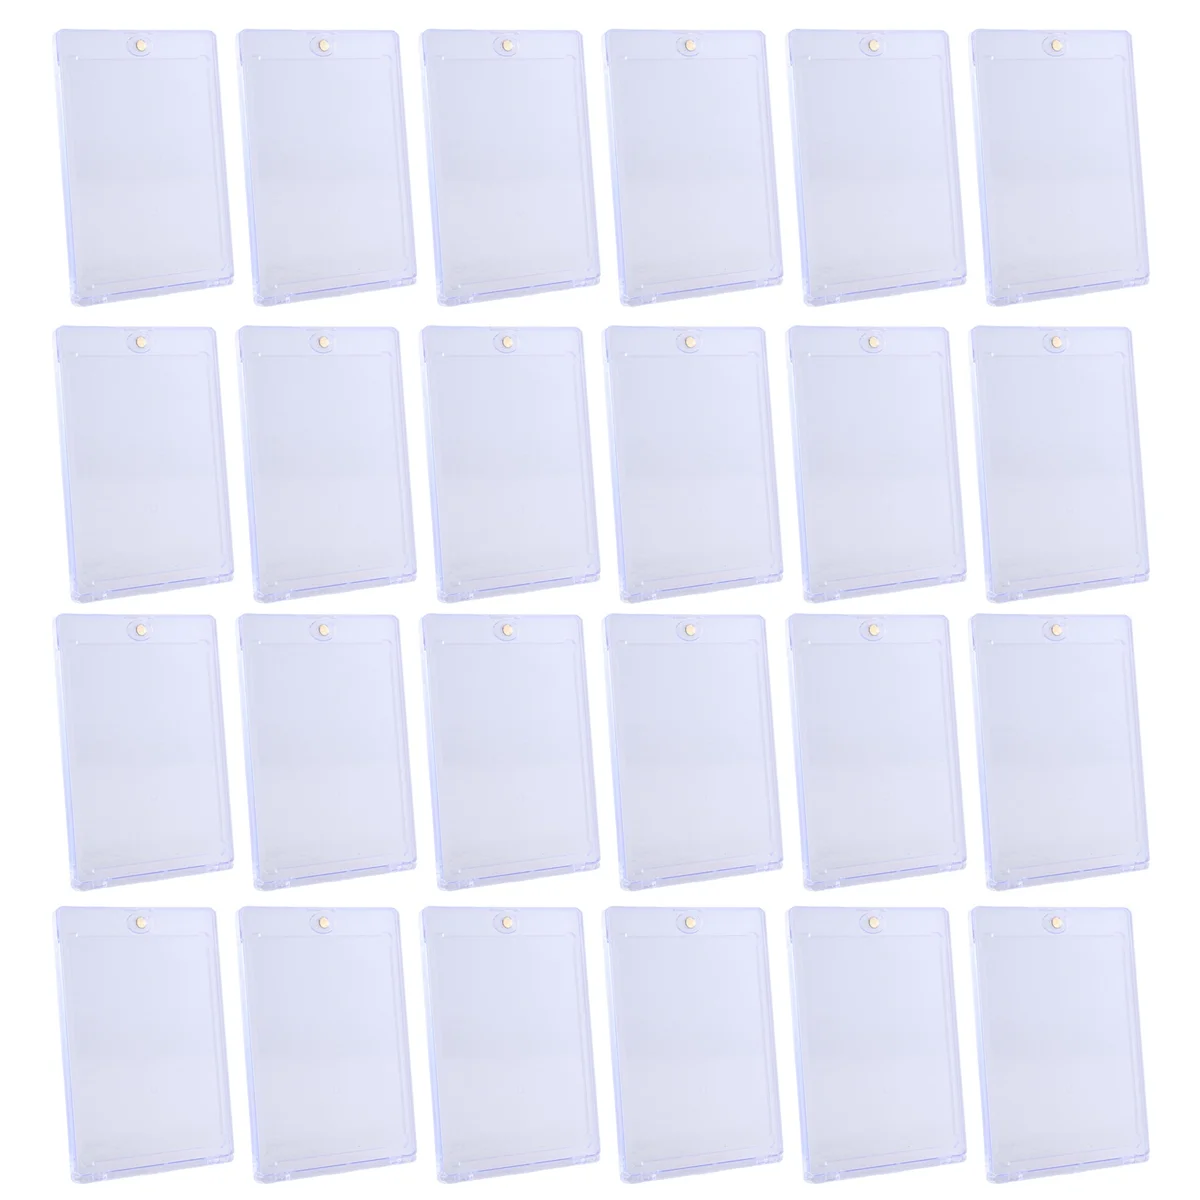 

24 Count Magnetic Card Holder 35Pt for Trading Cards, Baseball Card Protector Case Magnet Top Loaders for Sports Cards